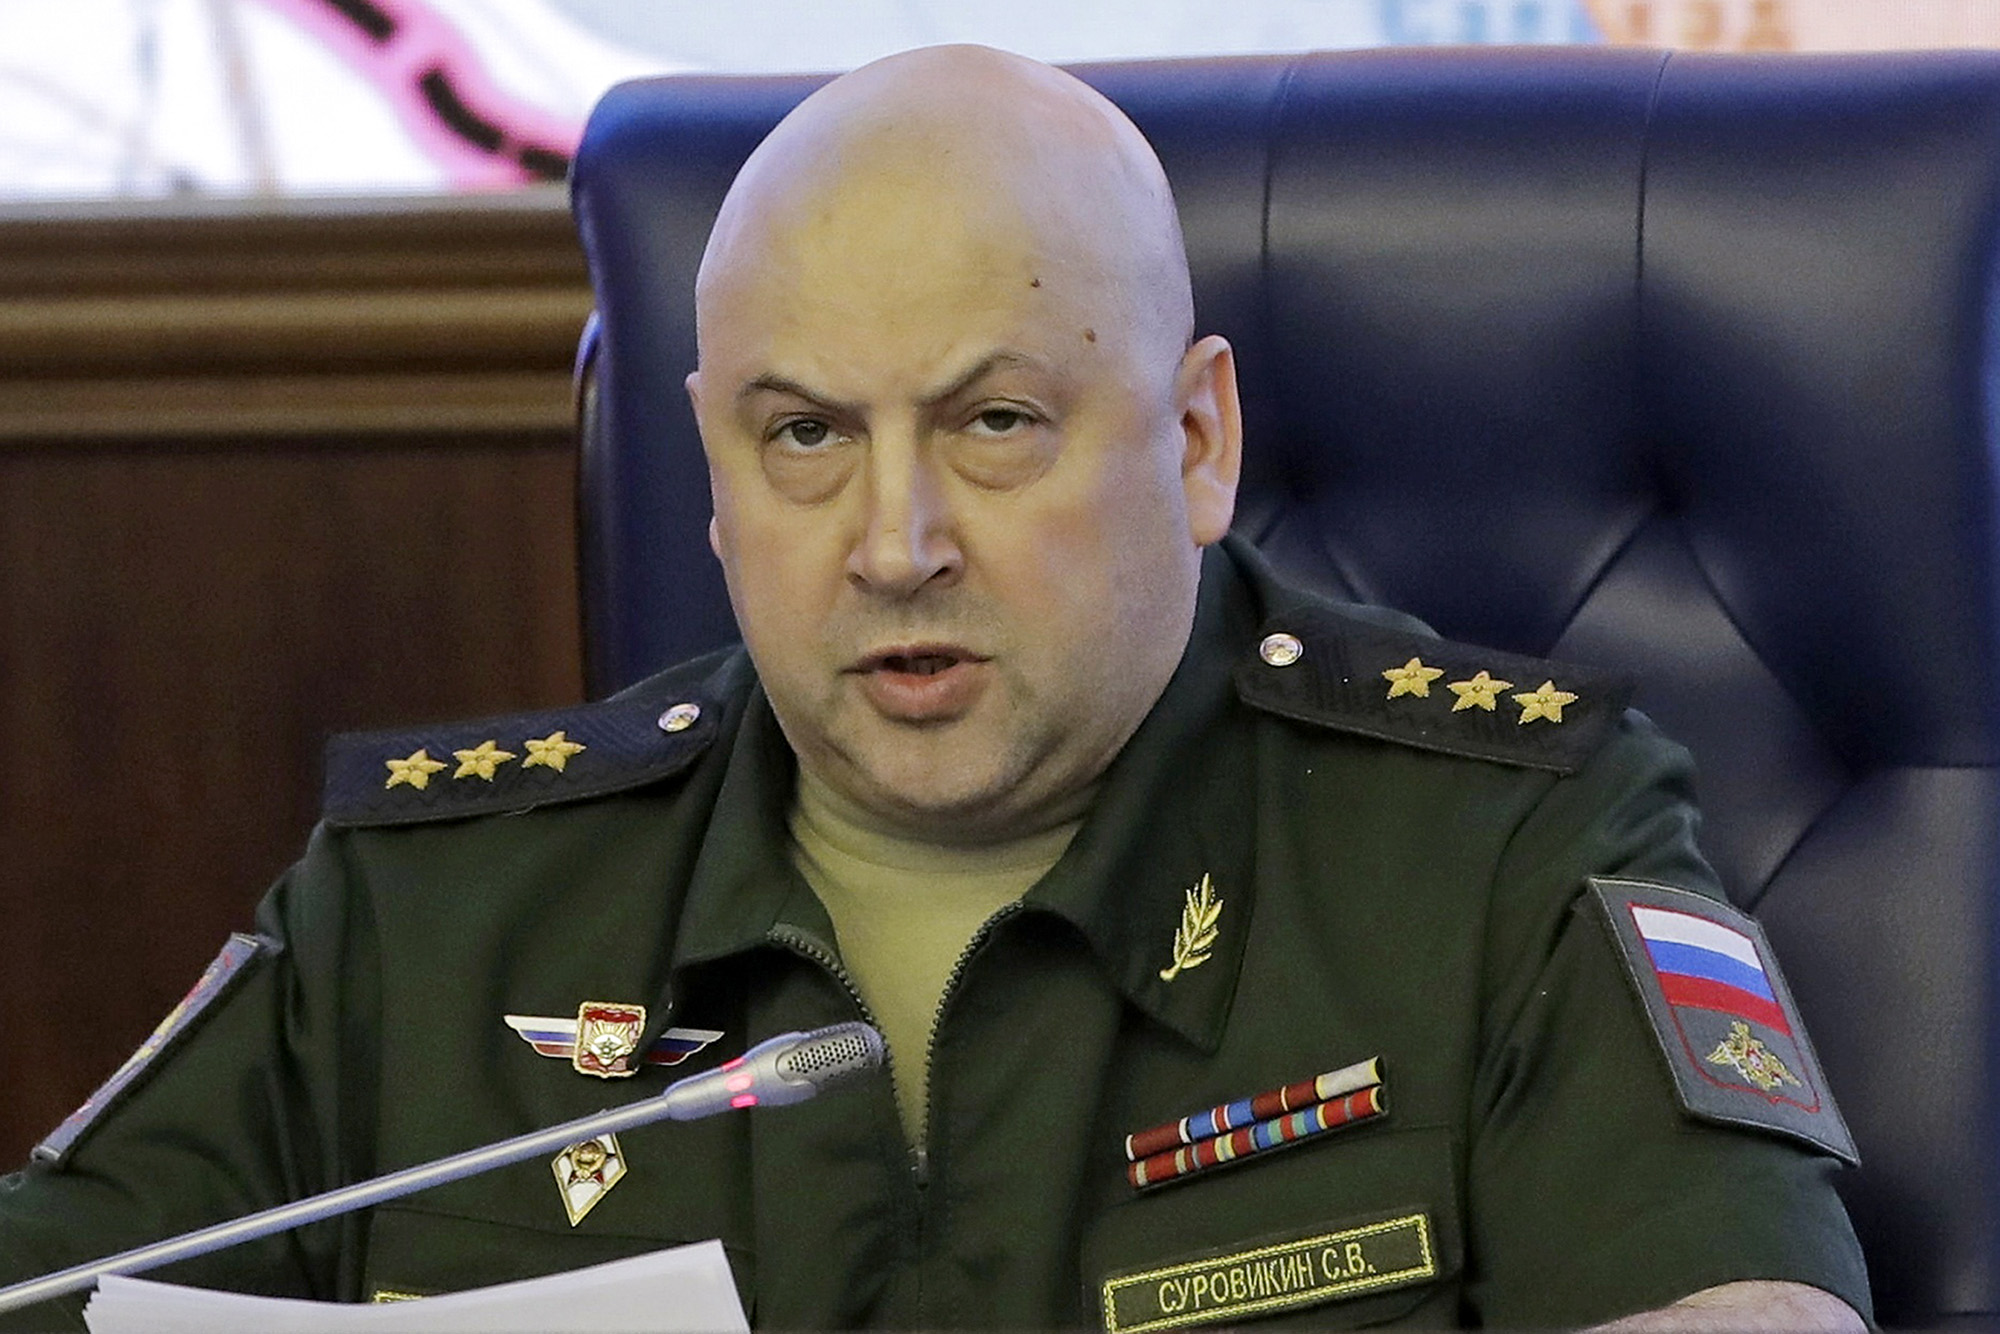 33) Who is Russian military general Sergey Surovikin?